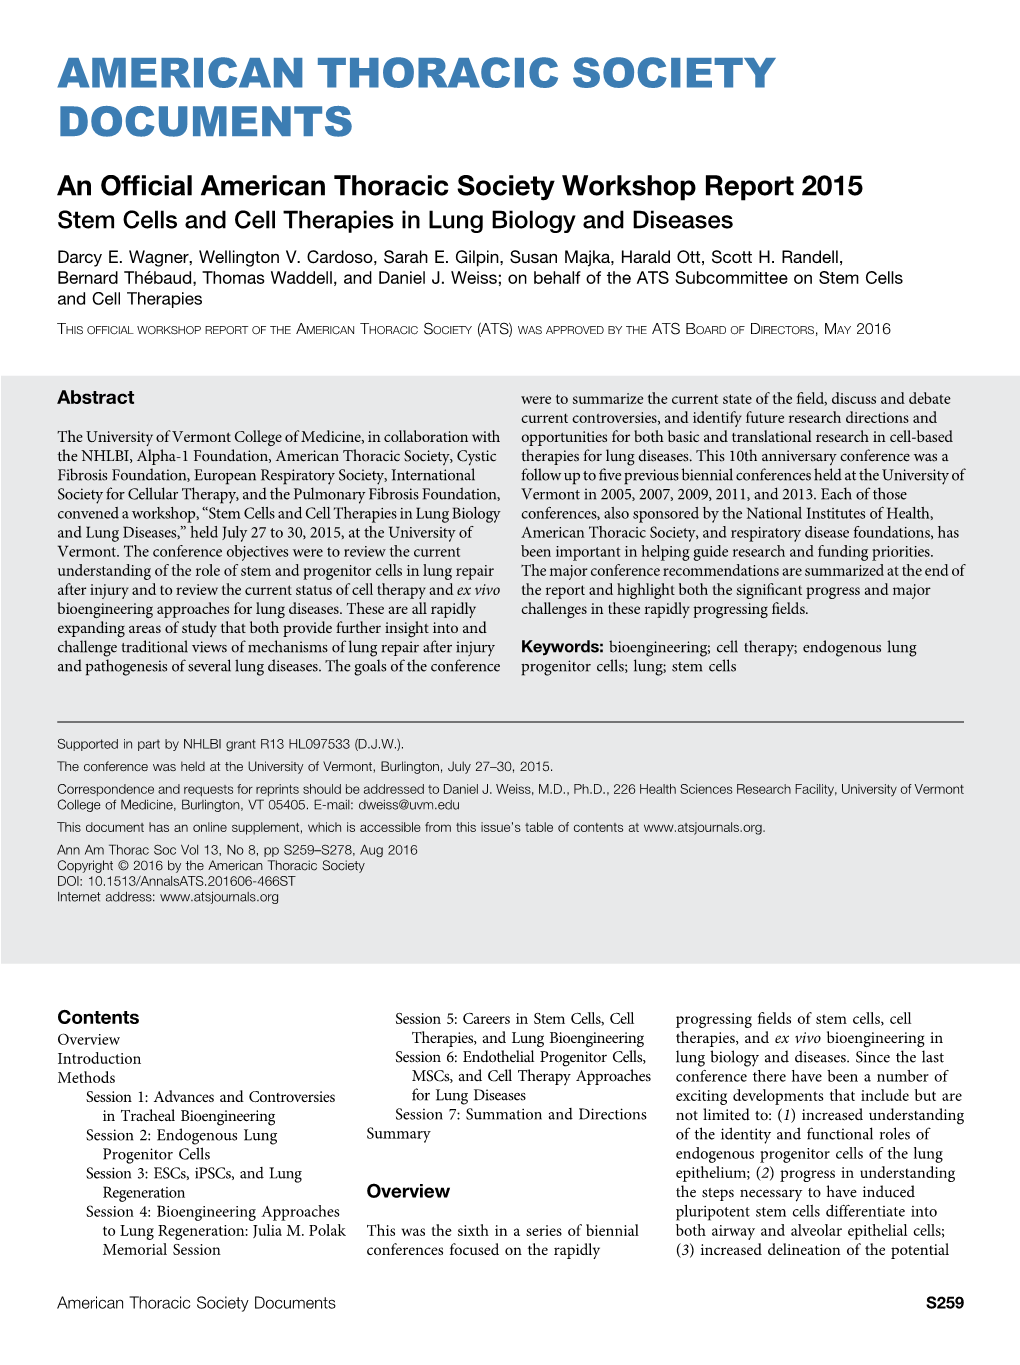 An Official American Thoracic Society Workshop Report 2015. Stem Cells and Cell Therapies in Lung Biology and Diseases